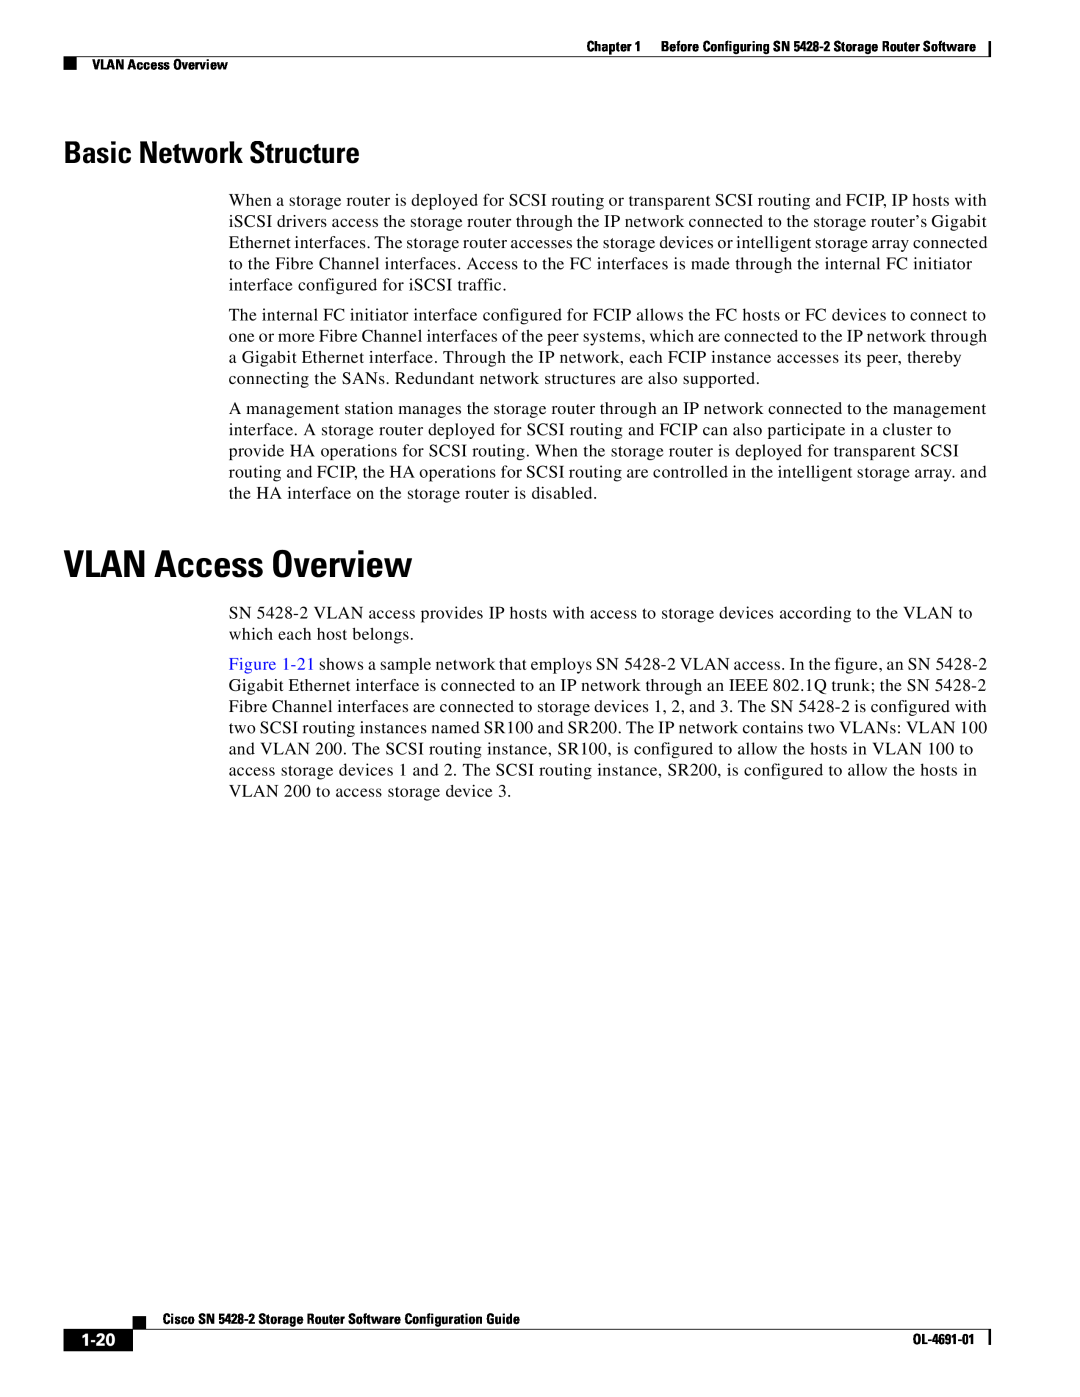 Cisco Systems SN 5428-2 manual VLAN Access Overview, 1-20, Basic Network Structure 